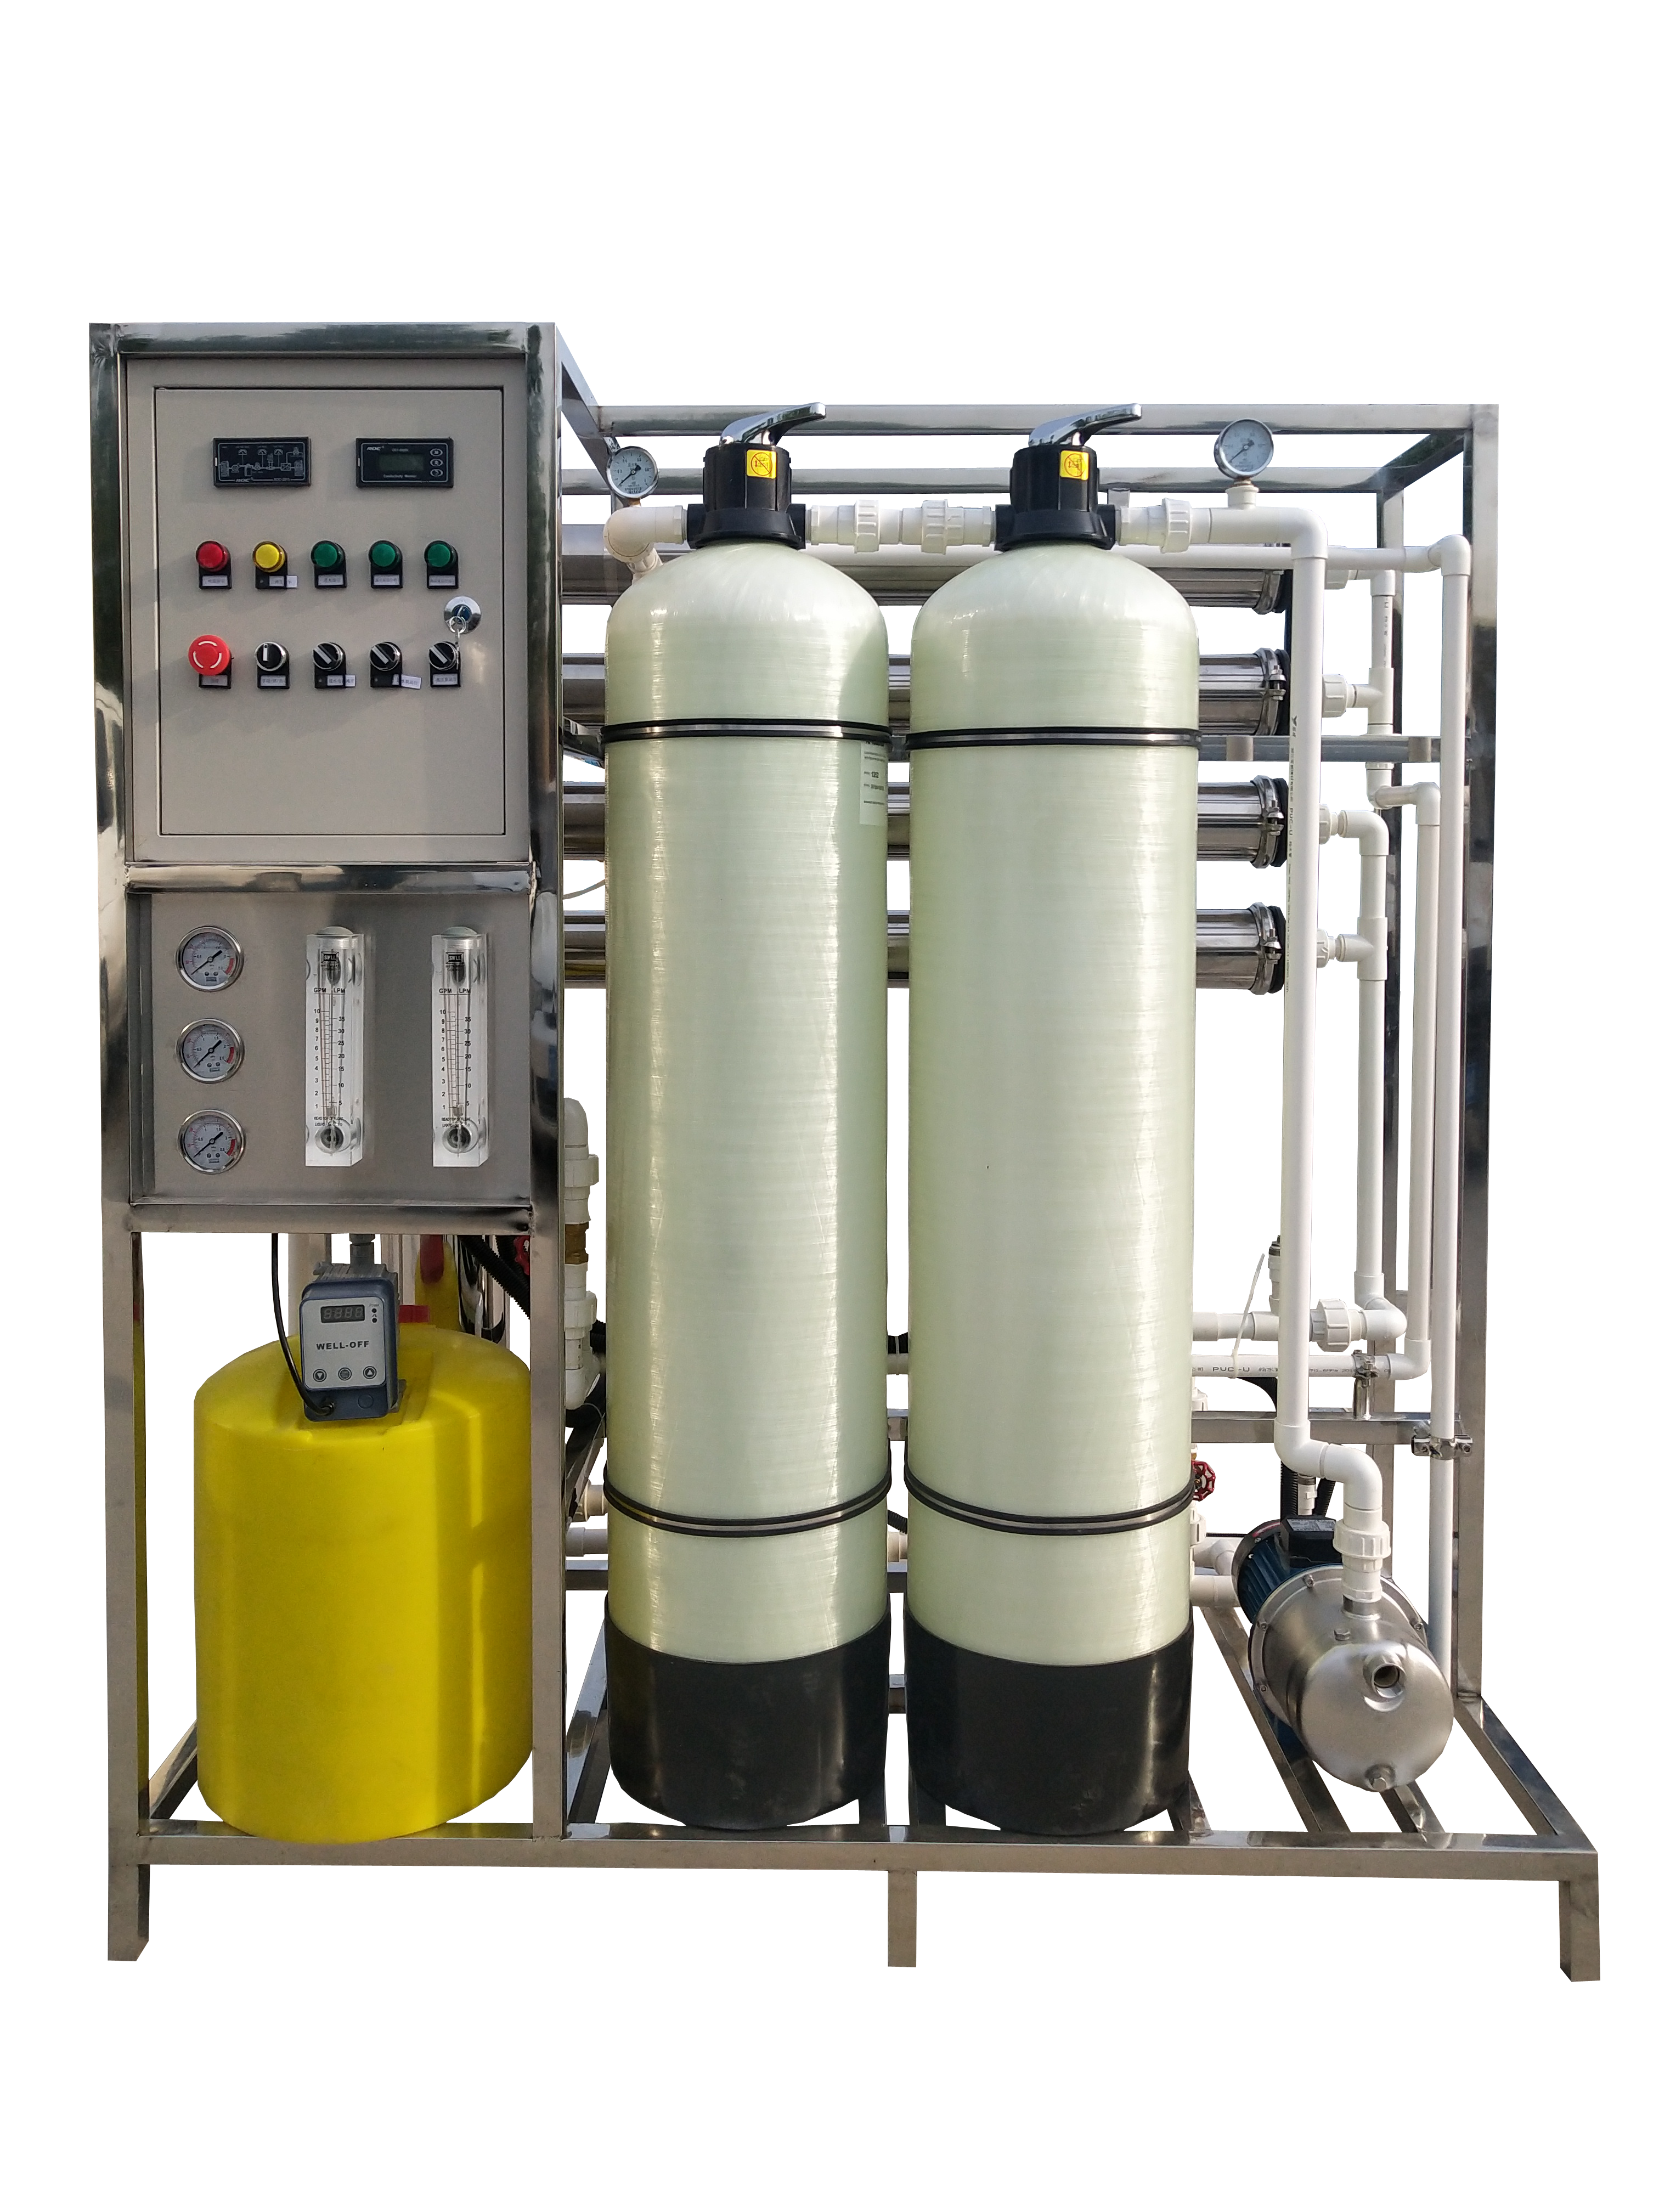 Key Factors To Consider When Installing Dual-Tank Water Softening Equipment